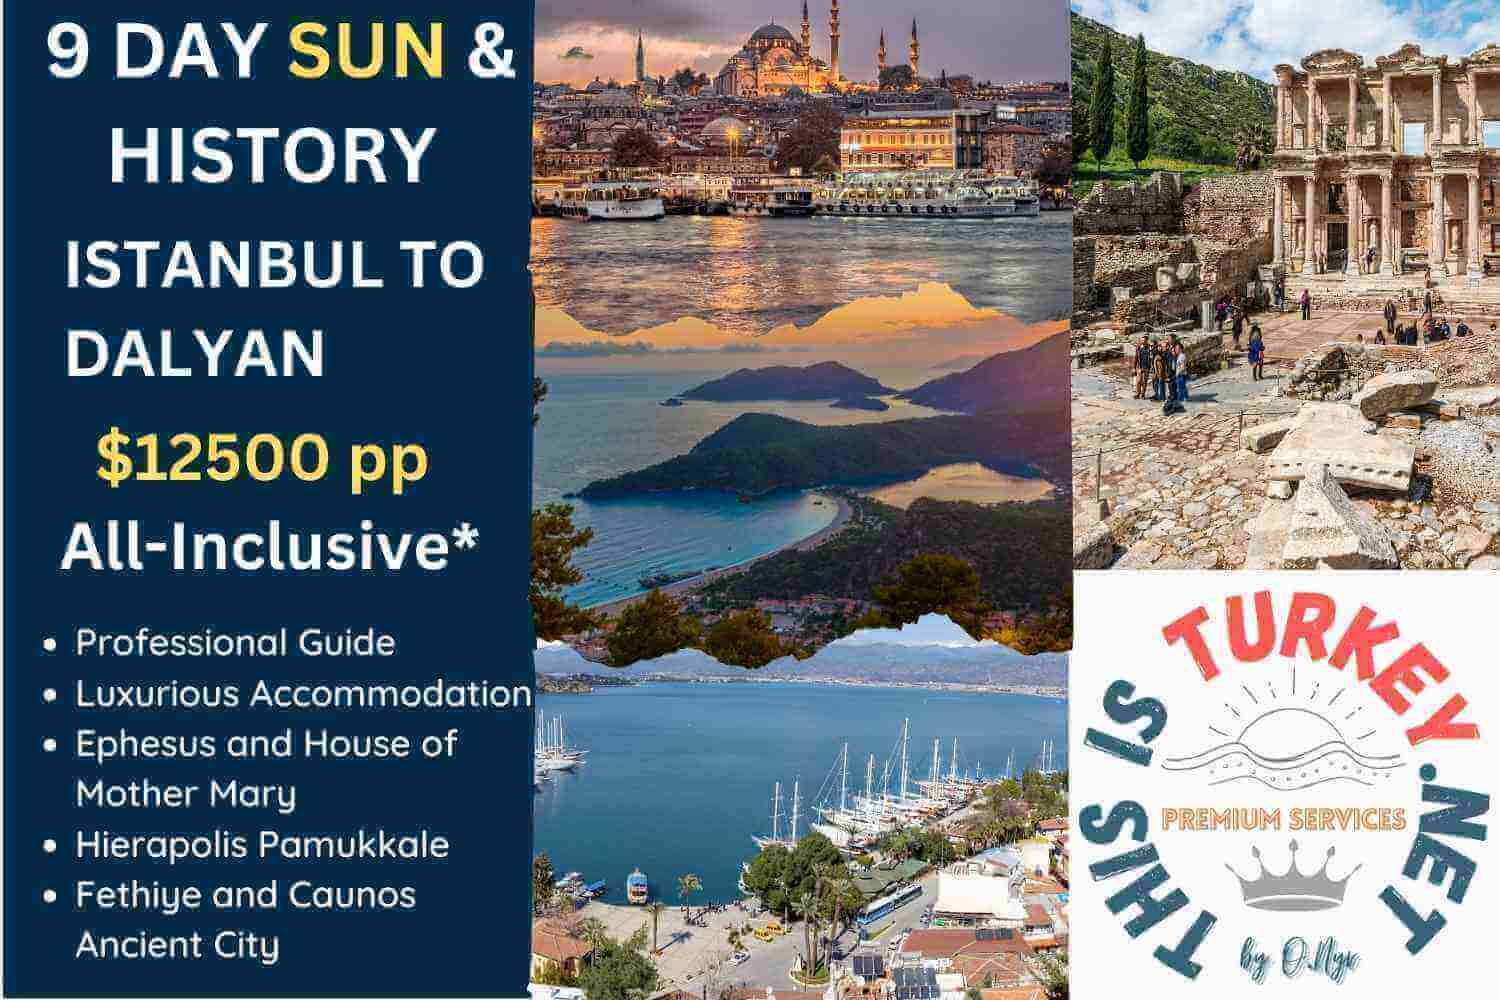 Istanbul to Fethiye and Dalyan from 12500 US Dollars Per Person Highlights Istanbul Ephesus and House of Mother Mary Hierapolis Pamukkale Fethiye and Caunos Ancient City This tour is ideal for those who like to include culture and history in their Holiday, with staying in luxurious accommodation, and professional service from start to end, where everything is taken care of.